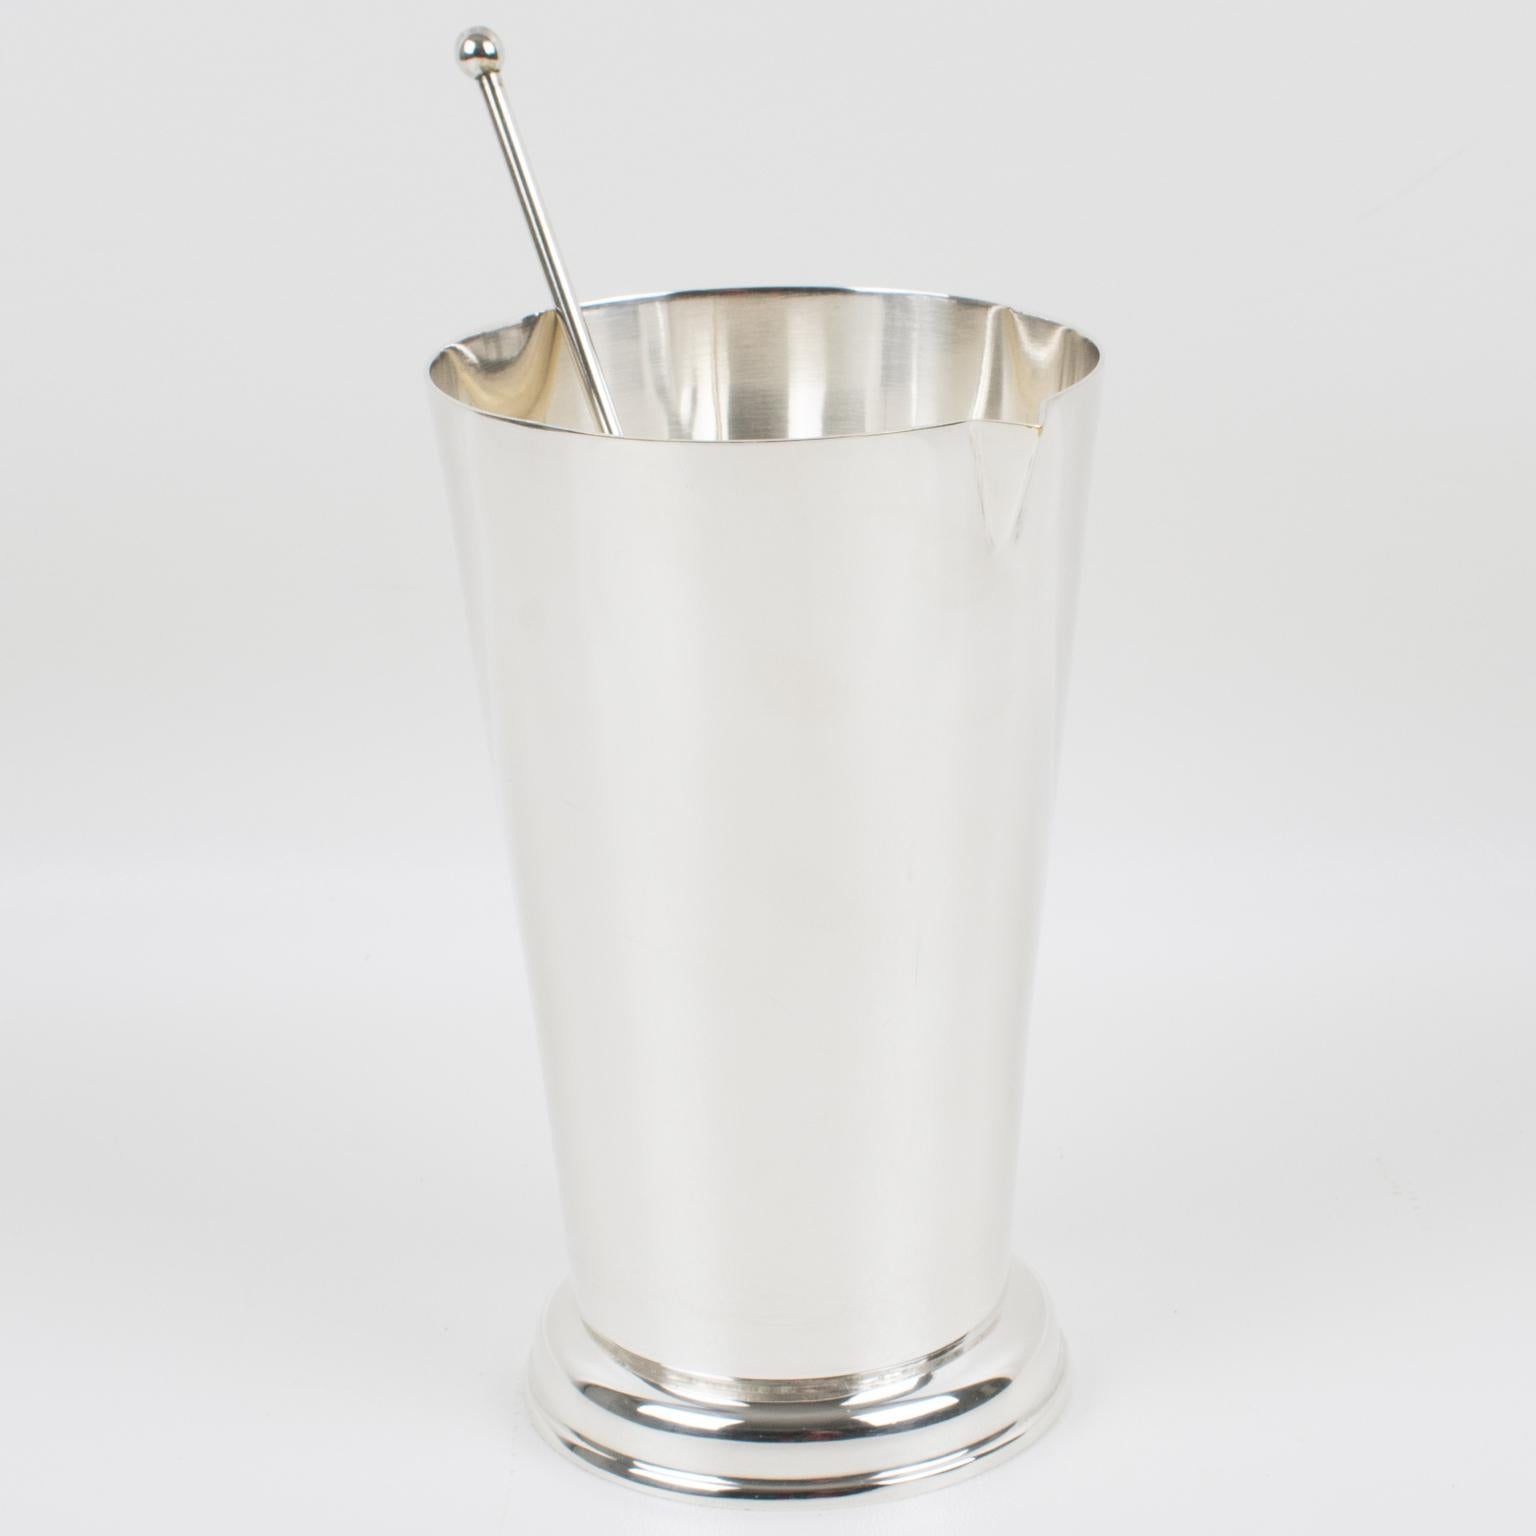 A streamlined Art Deco barware set designed by French silversmith Produx, Paris. Sleek and modernist shape with tall silver plate Martini pitcher or mixer jug and long stirrer spoon. Marked underside with legal silversmith hallmarks.
Measurements: